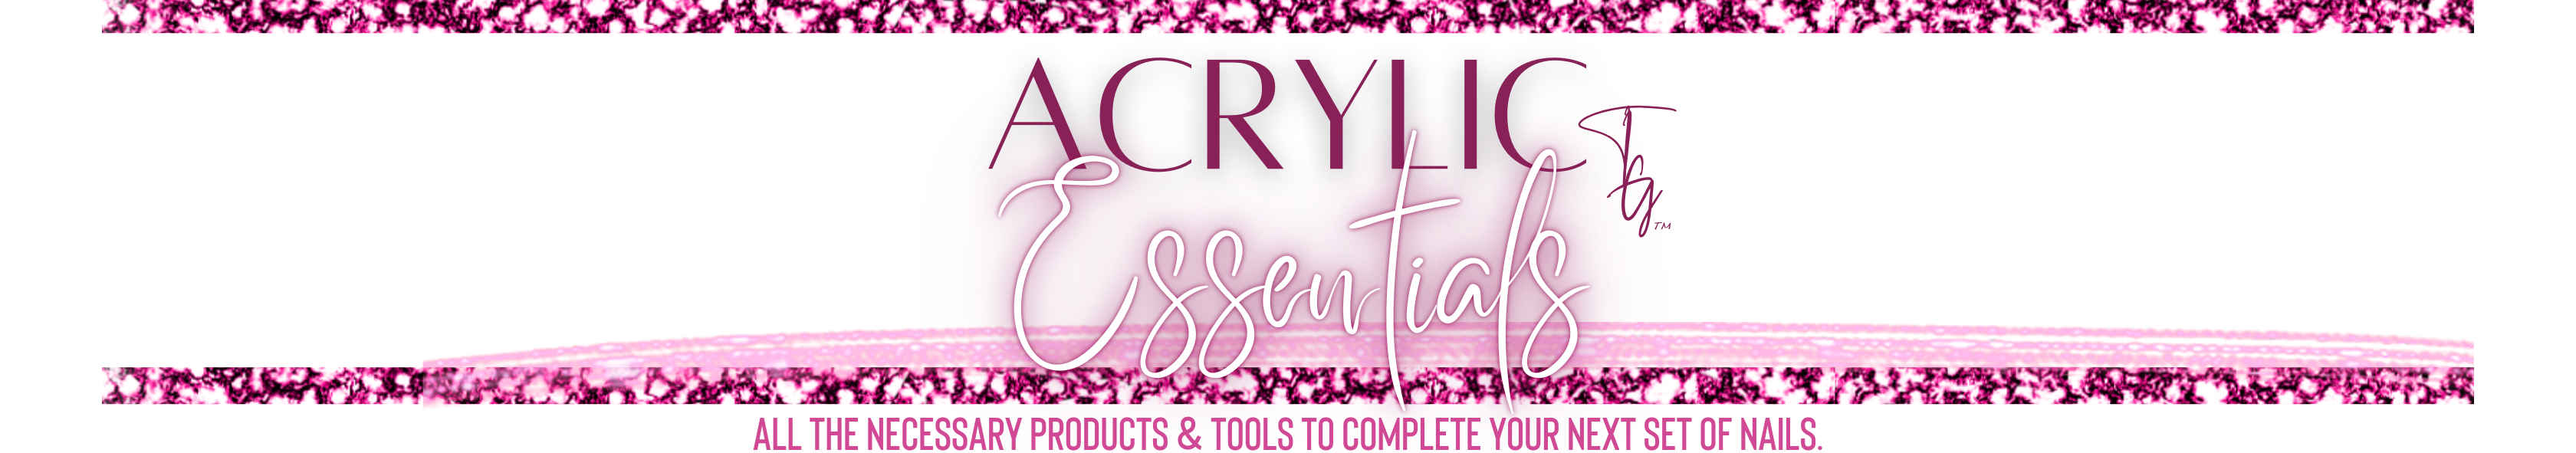 013433605911465-acrylic-essentials-page-header.png